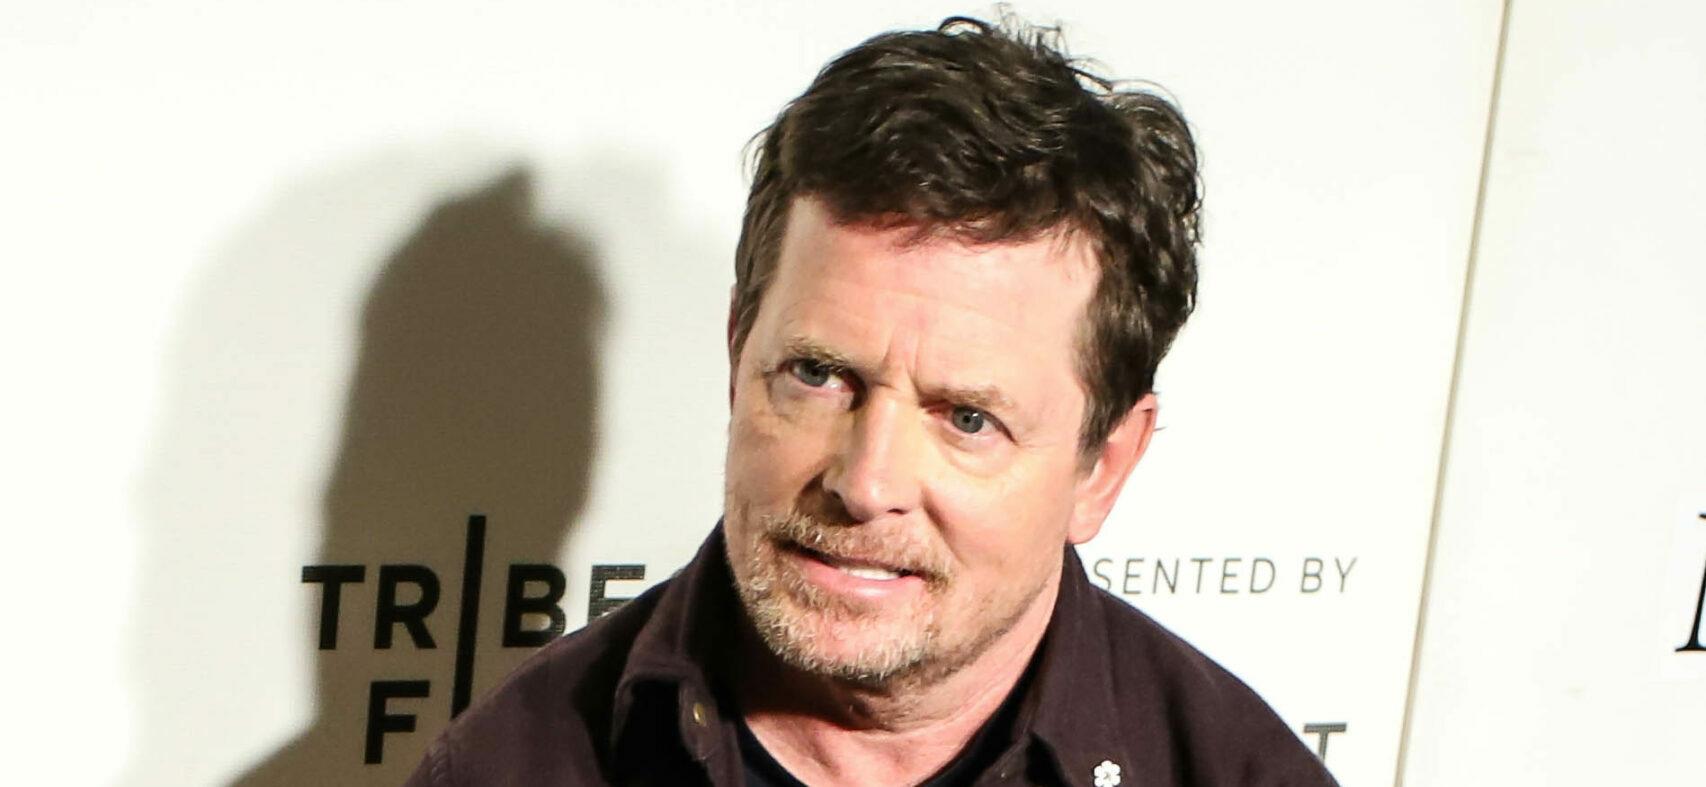 Michael J. Fox Recalls ‘Dumpster Diving For Food’ As A Teen Before Attaining Fame